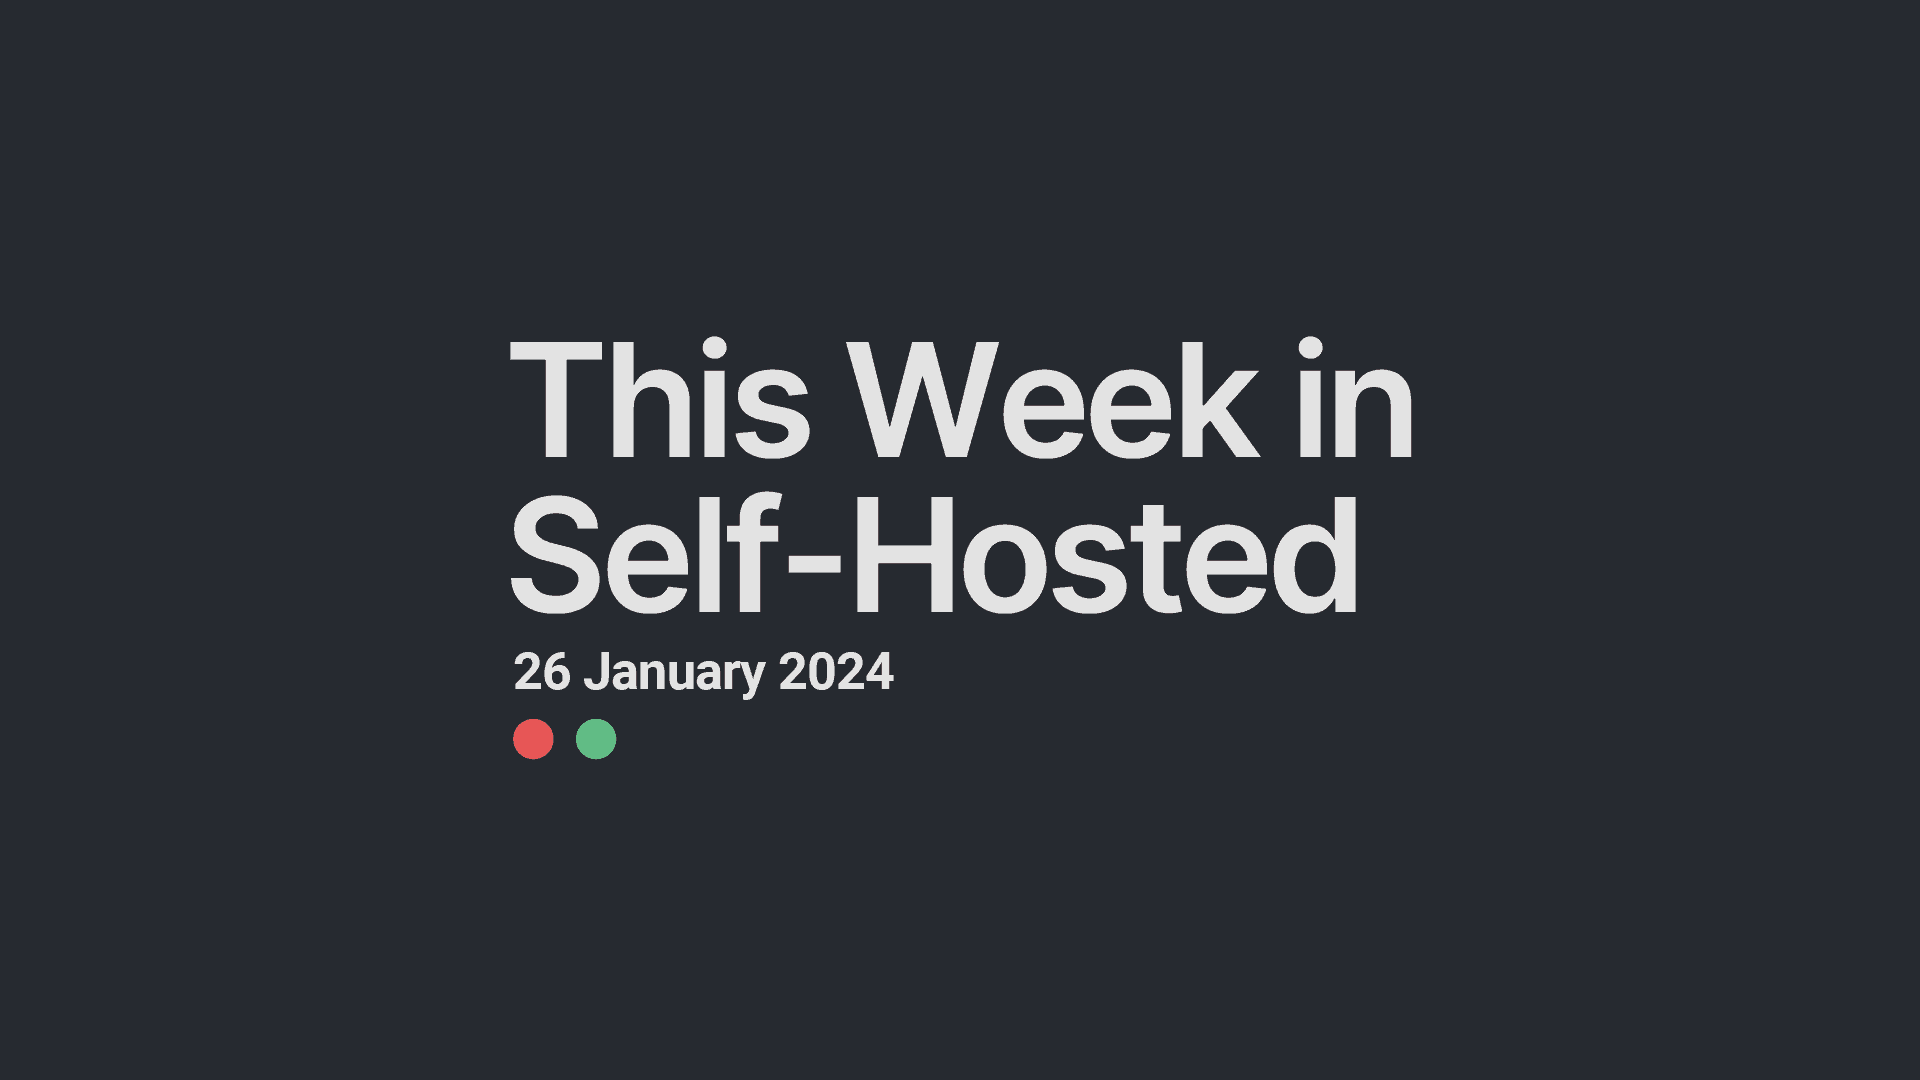 This Week in Self-Hosted (26 January 2024) Post image